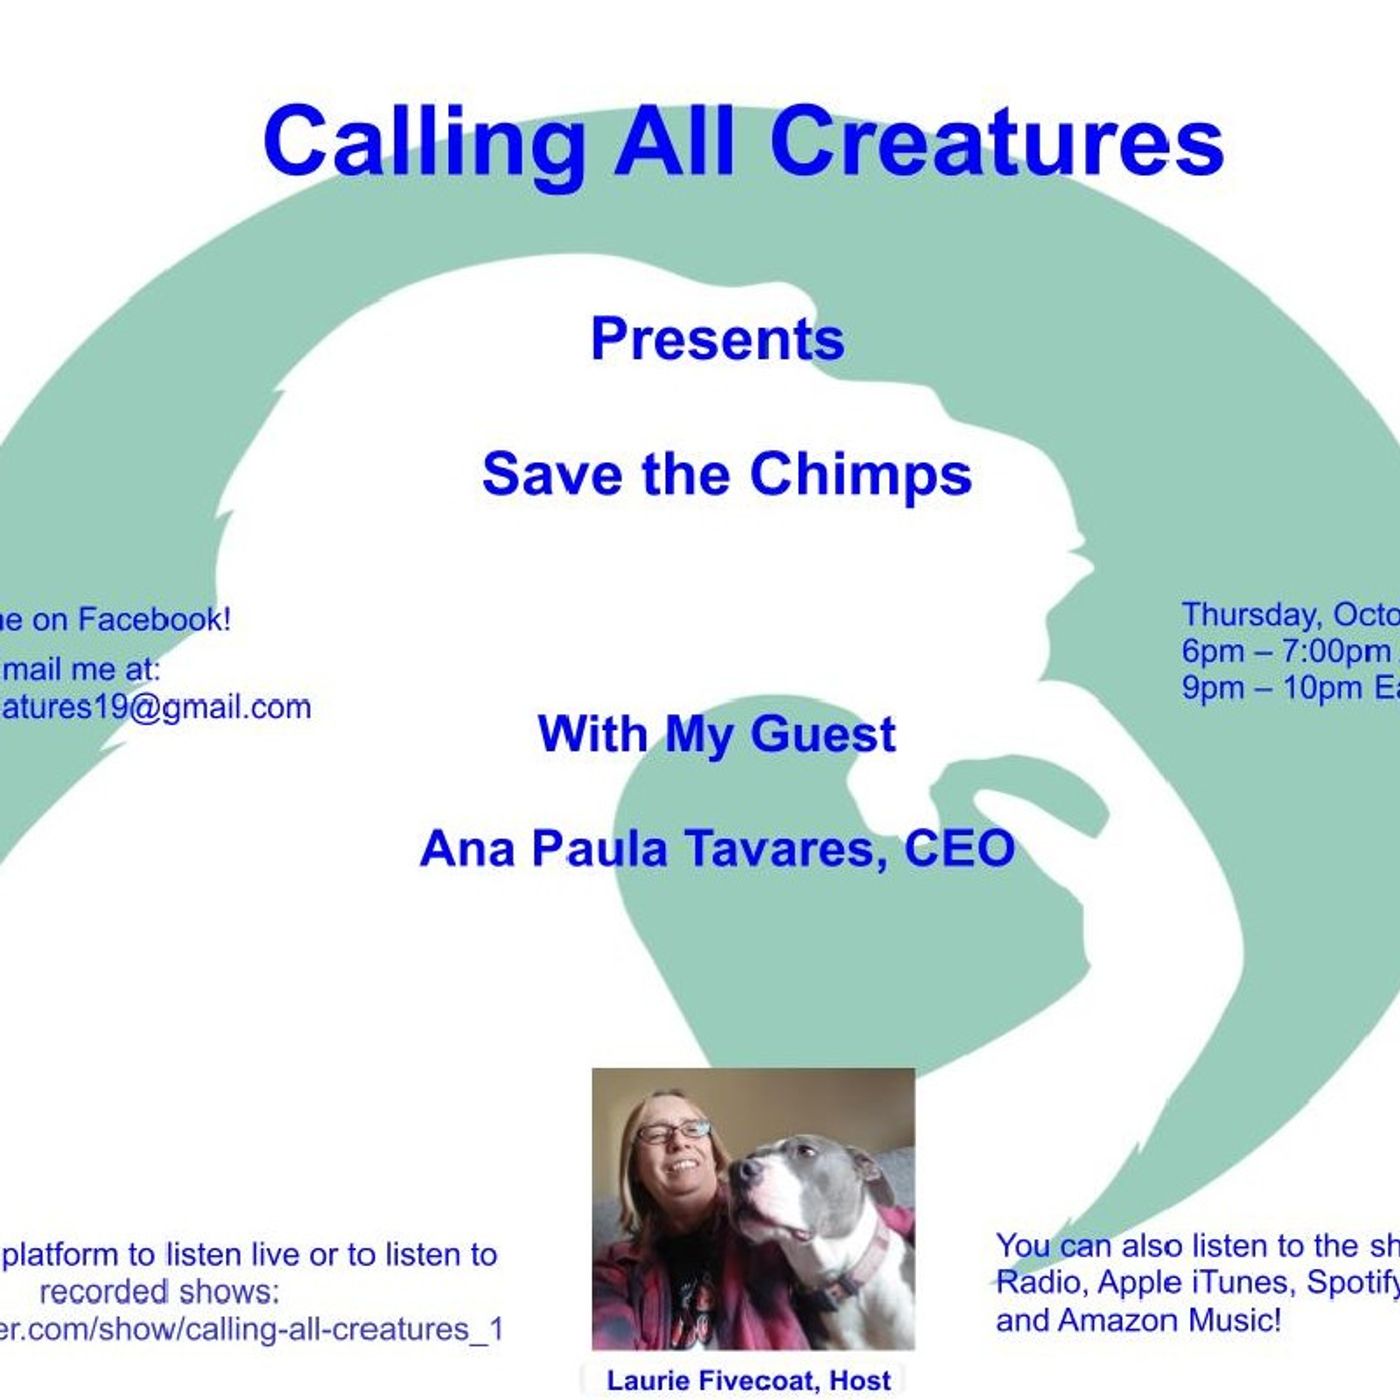 Calling All Creatures Presents Save the Chimps